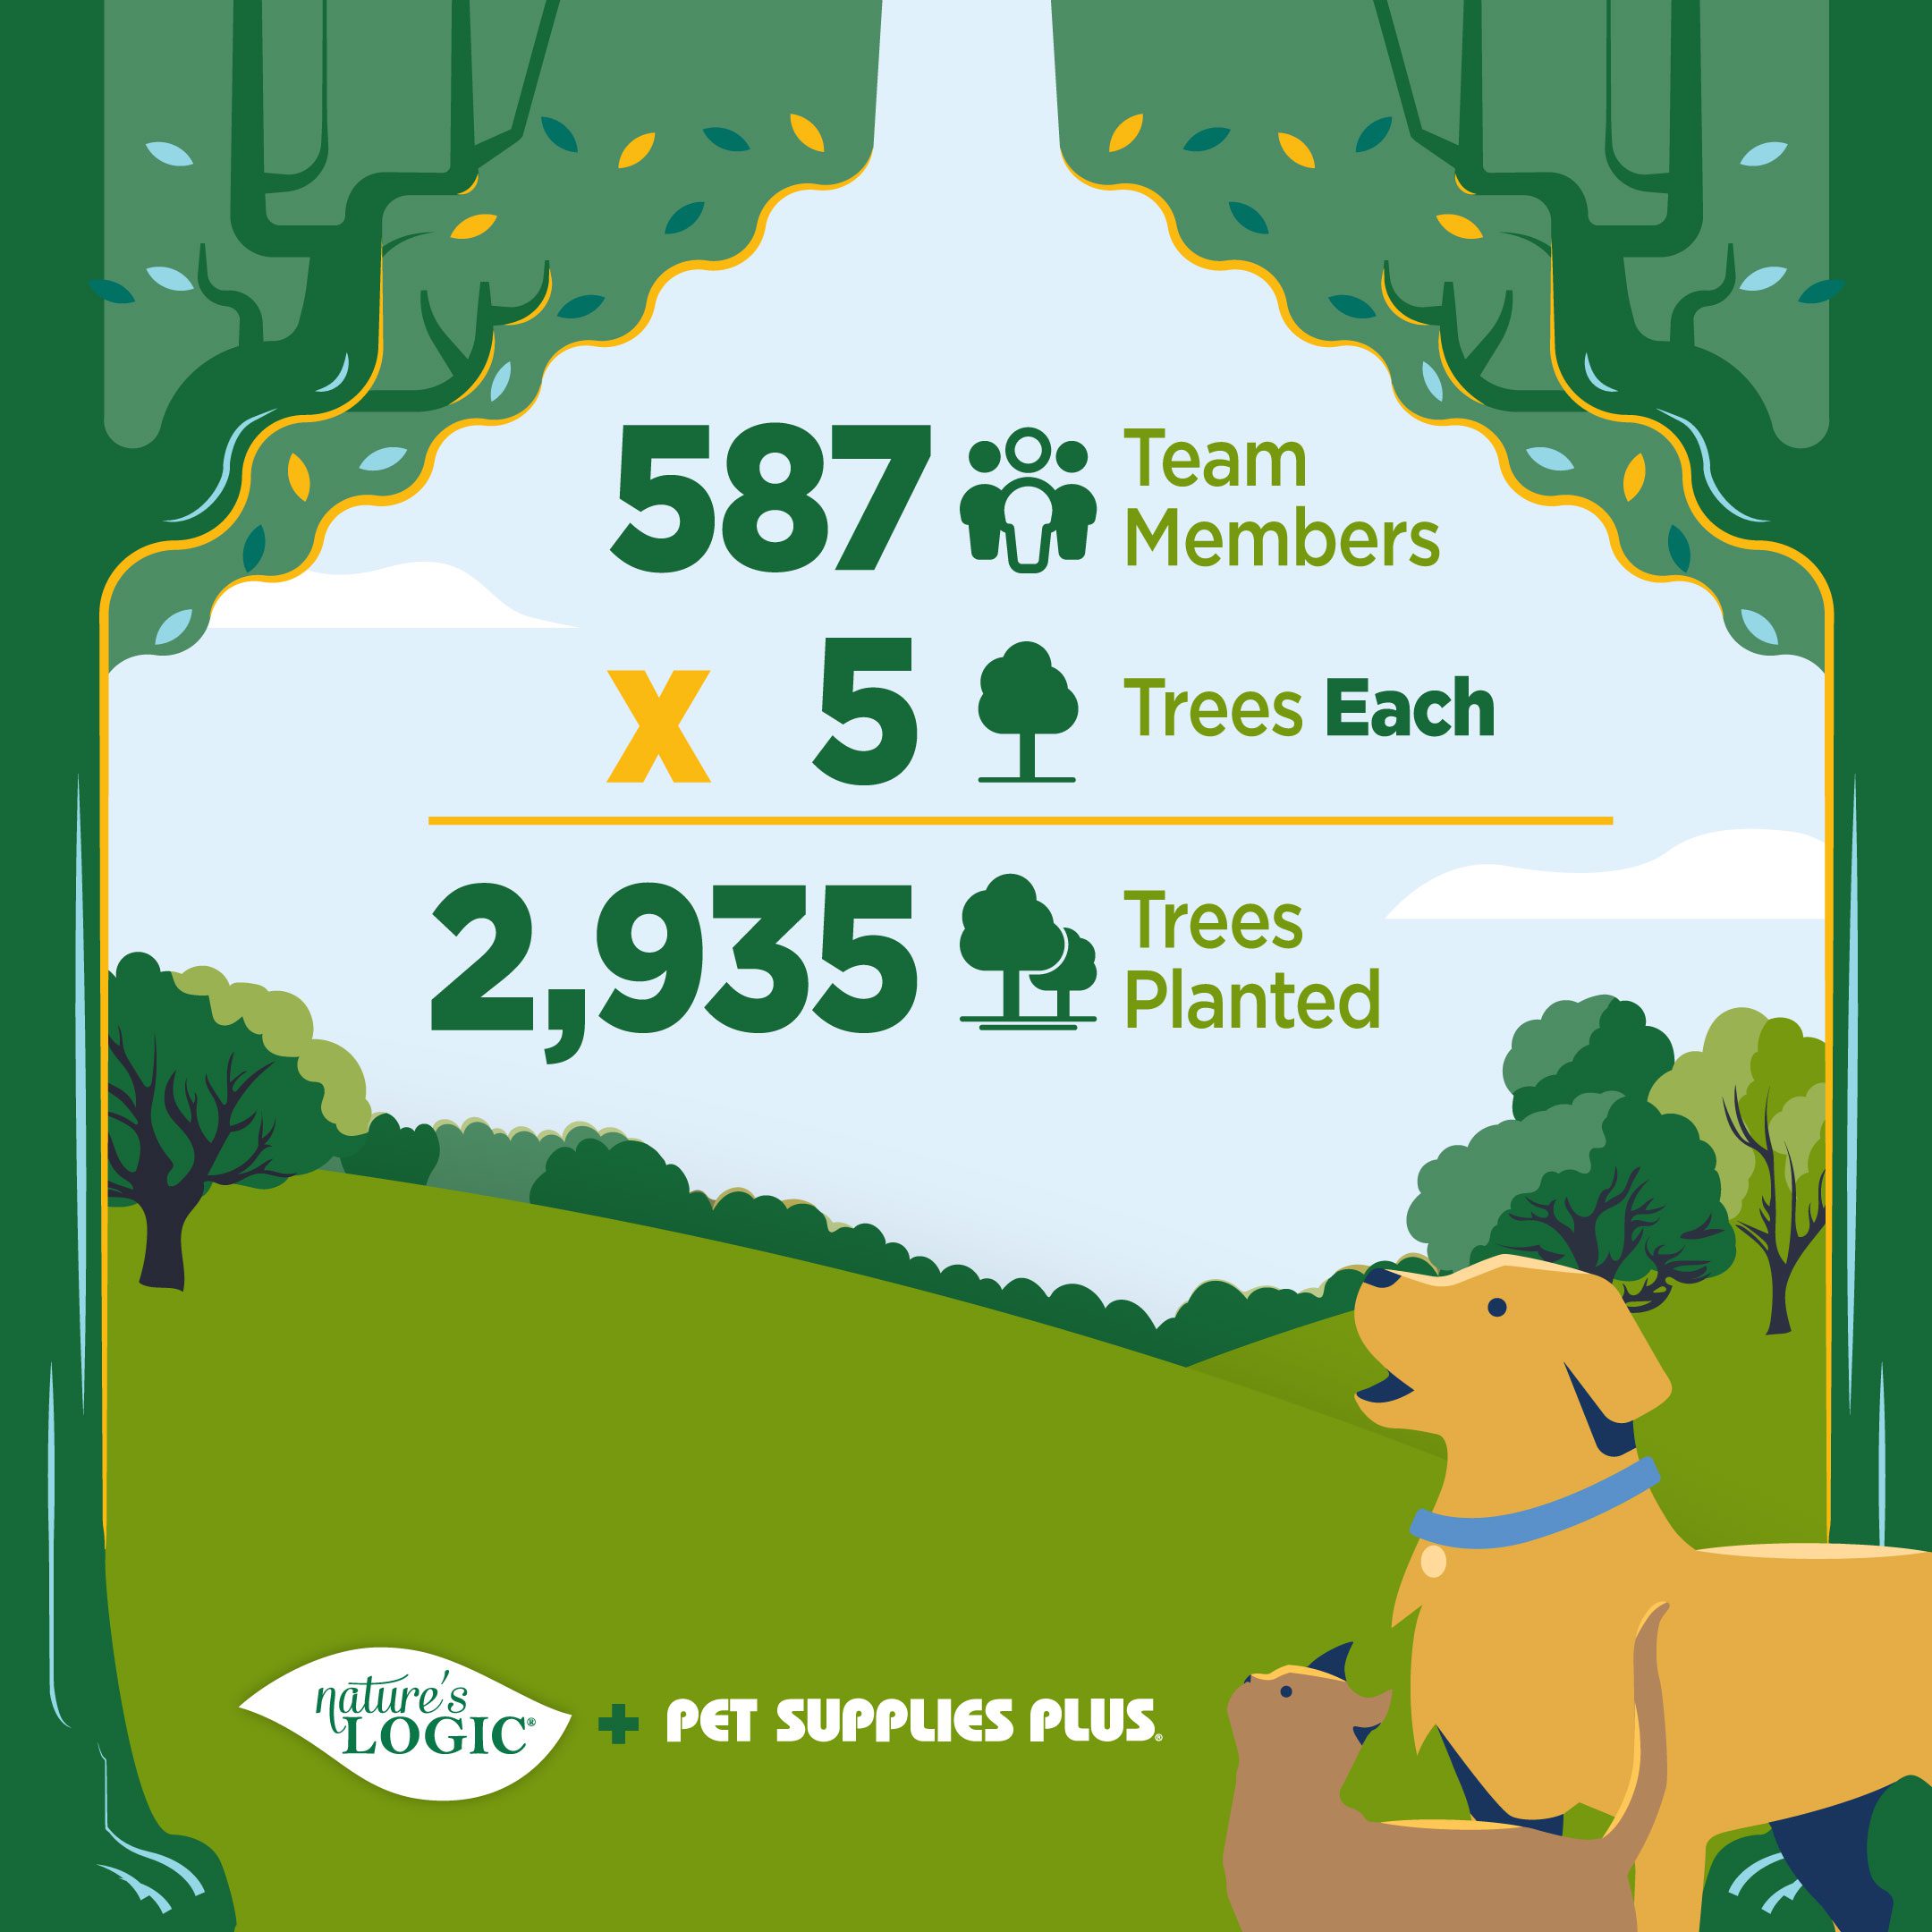 Nature’s Logic Plants 2,935 Trees Across the United States